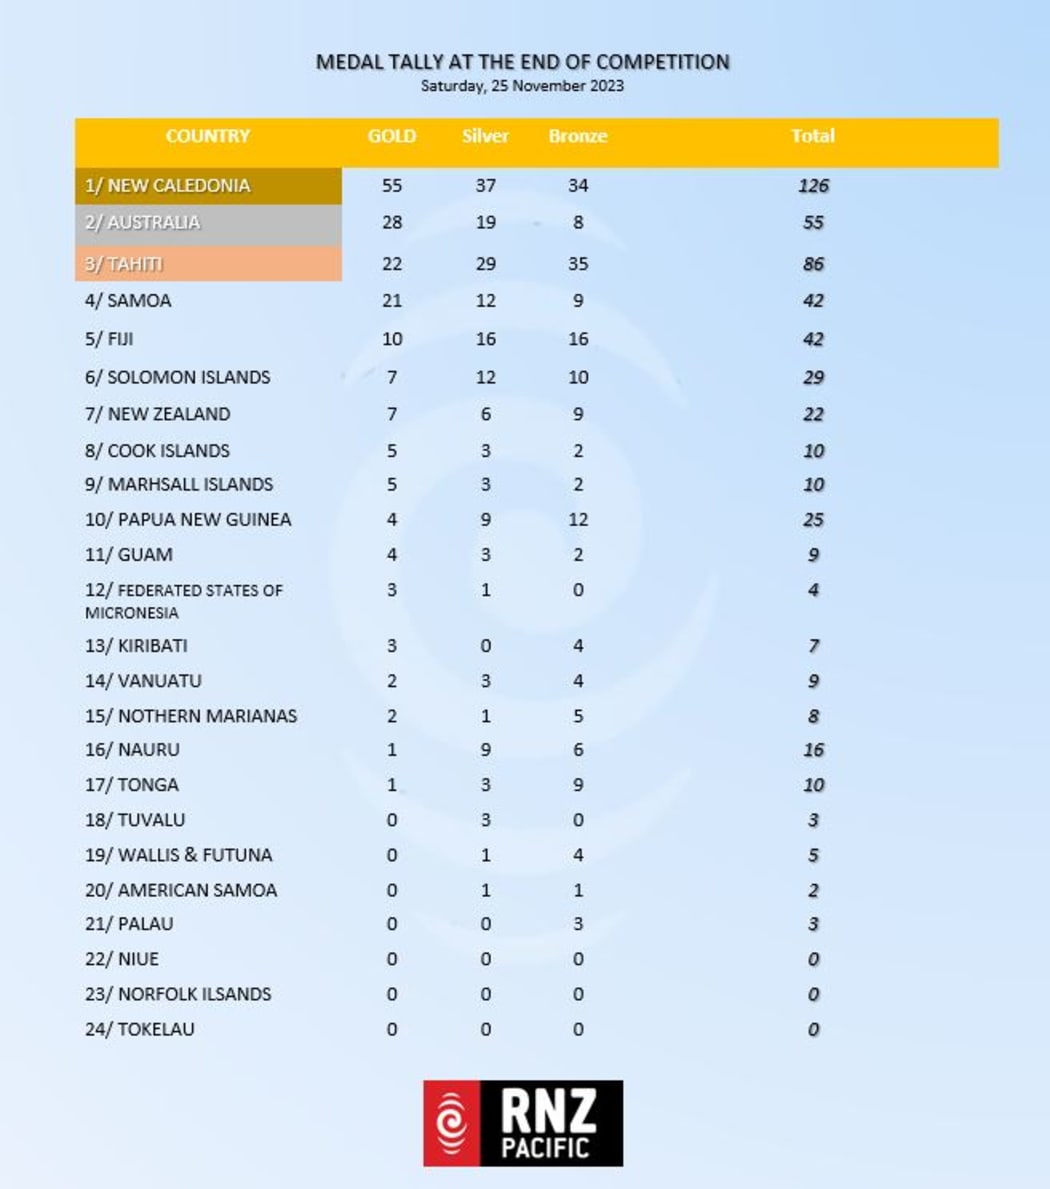 Medal tally at the end of competition on Saturday, 25 November 2023.